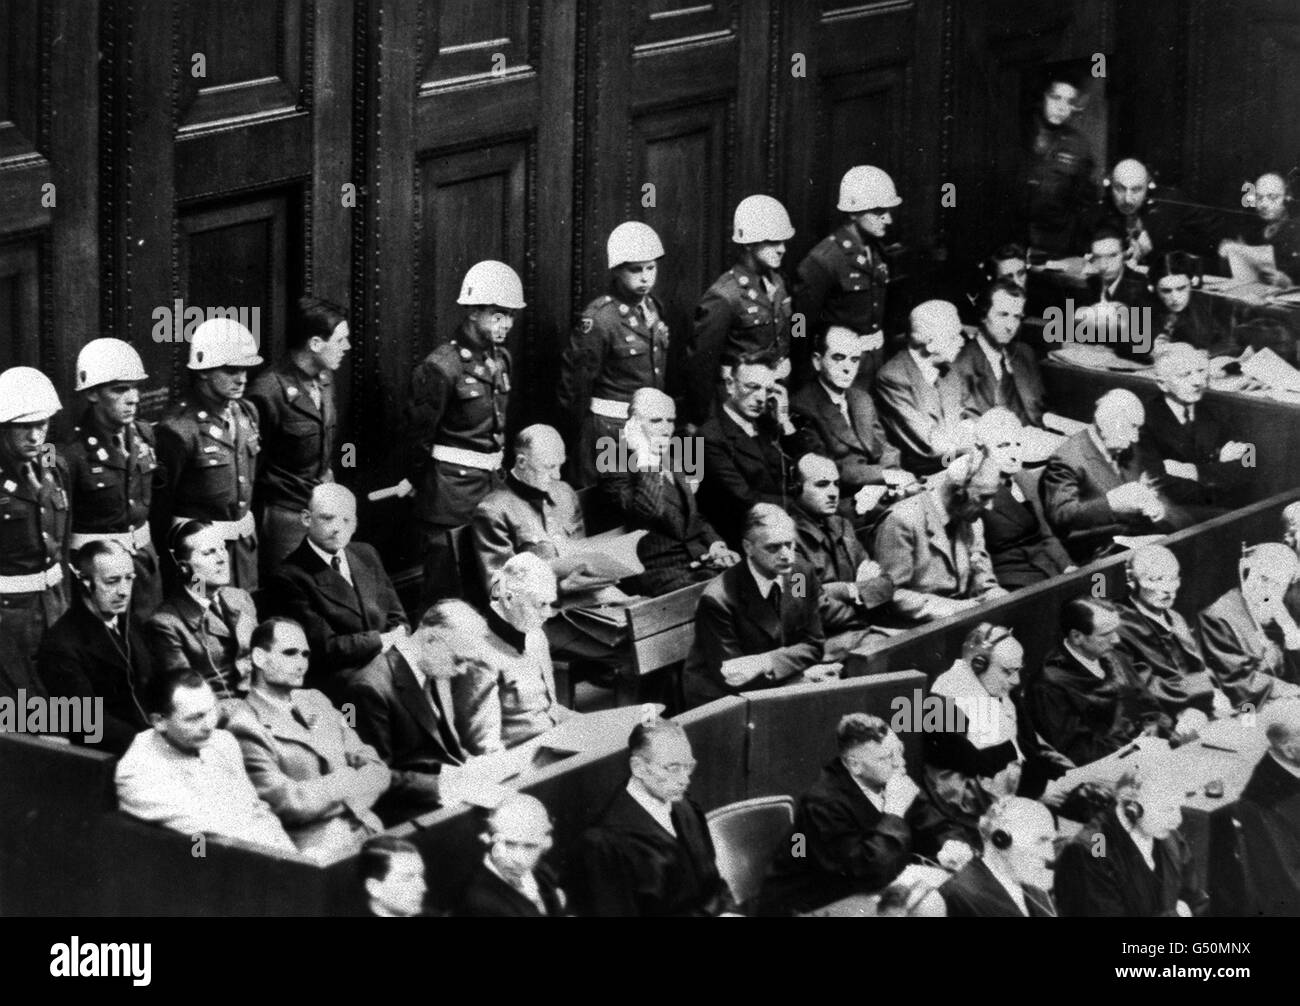 NUREMBERG TRIALS 1945: A general view of the former Nazi leaders of Germany during the Nuremberg trials which began at the Palace of Justice on 20/11/45. American military policemen watch over the two rows of defendants which include Goering, Hess, Keitel, Speer and Jodl. Second World War Stock Photo